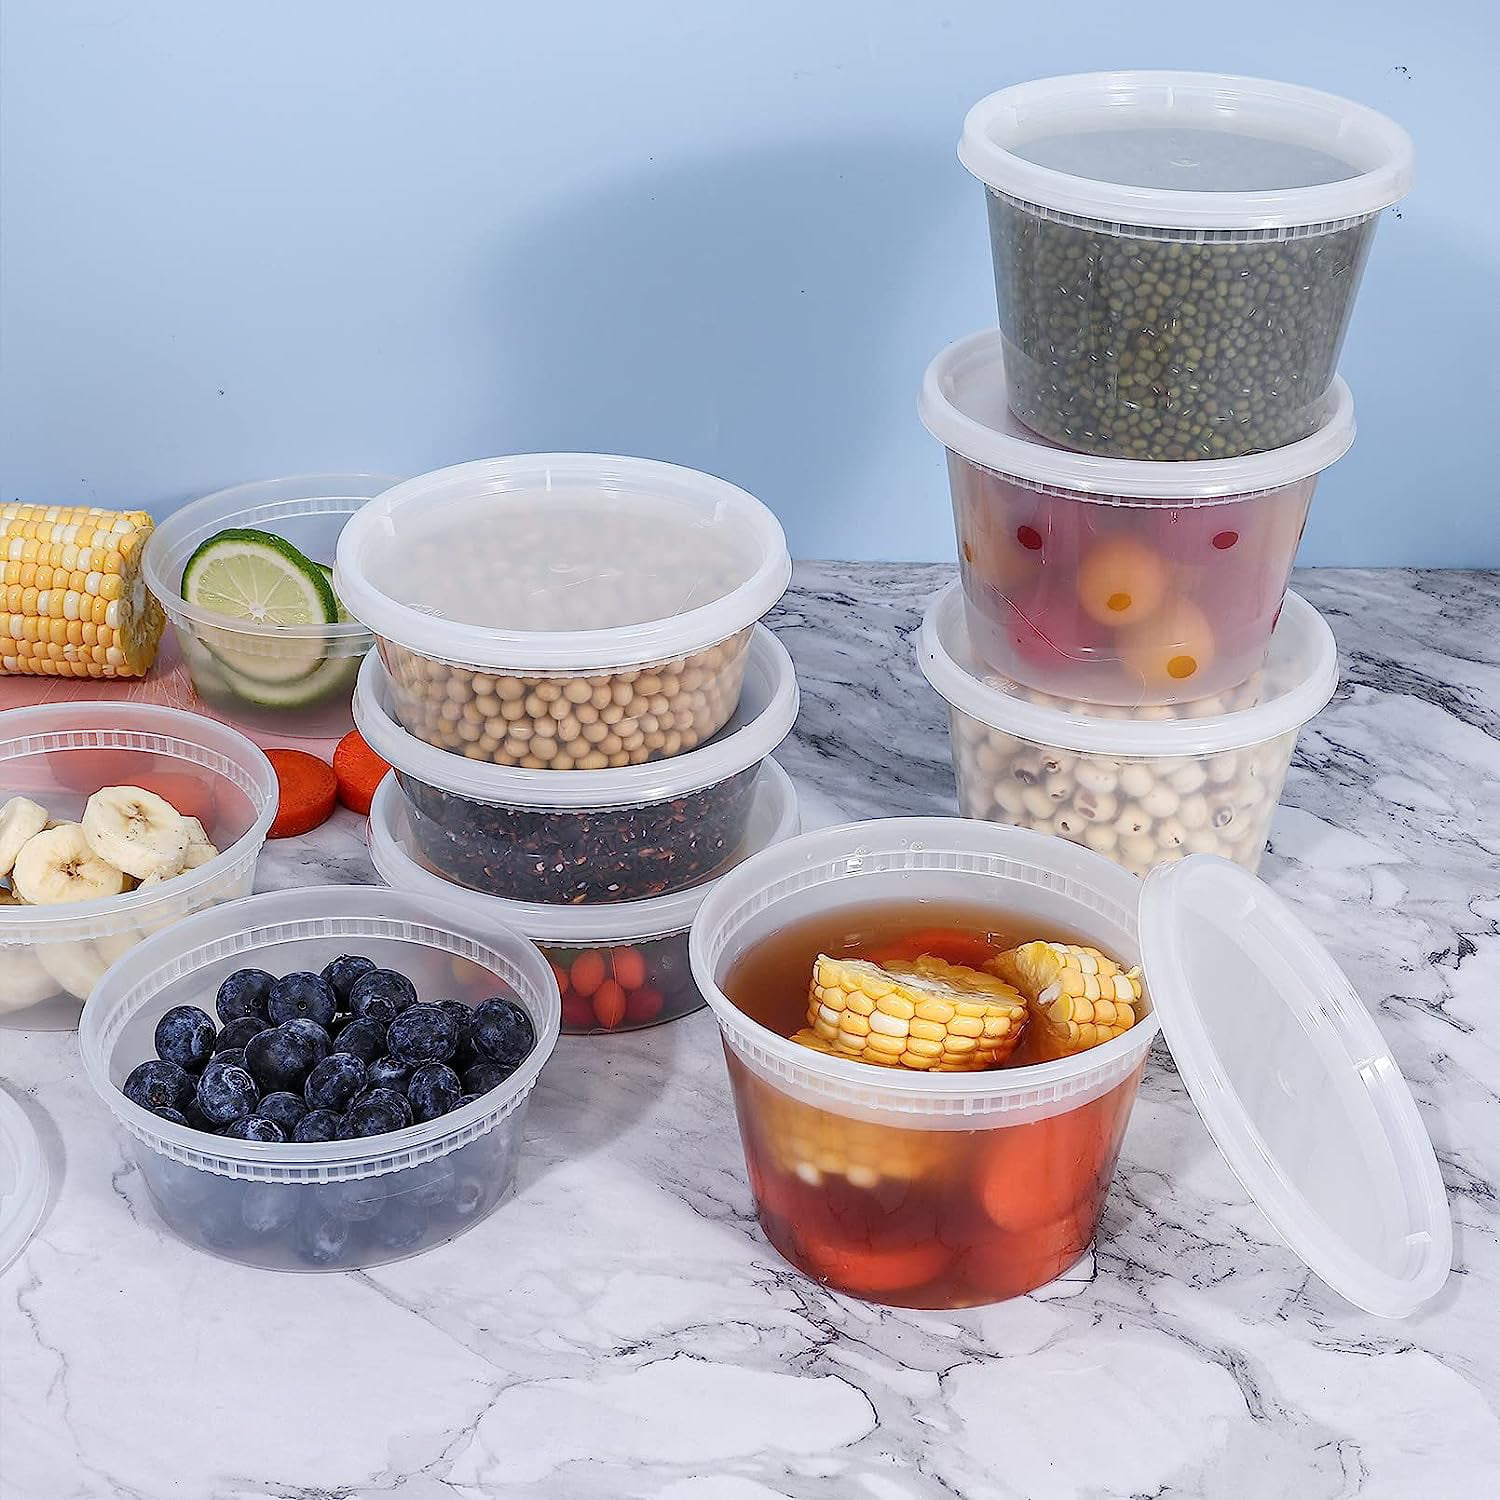 16oz Deli Food Storage Containers with Lid Togo Soup Cup Microwave